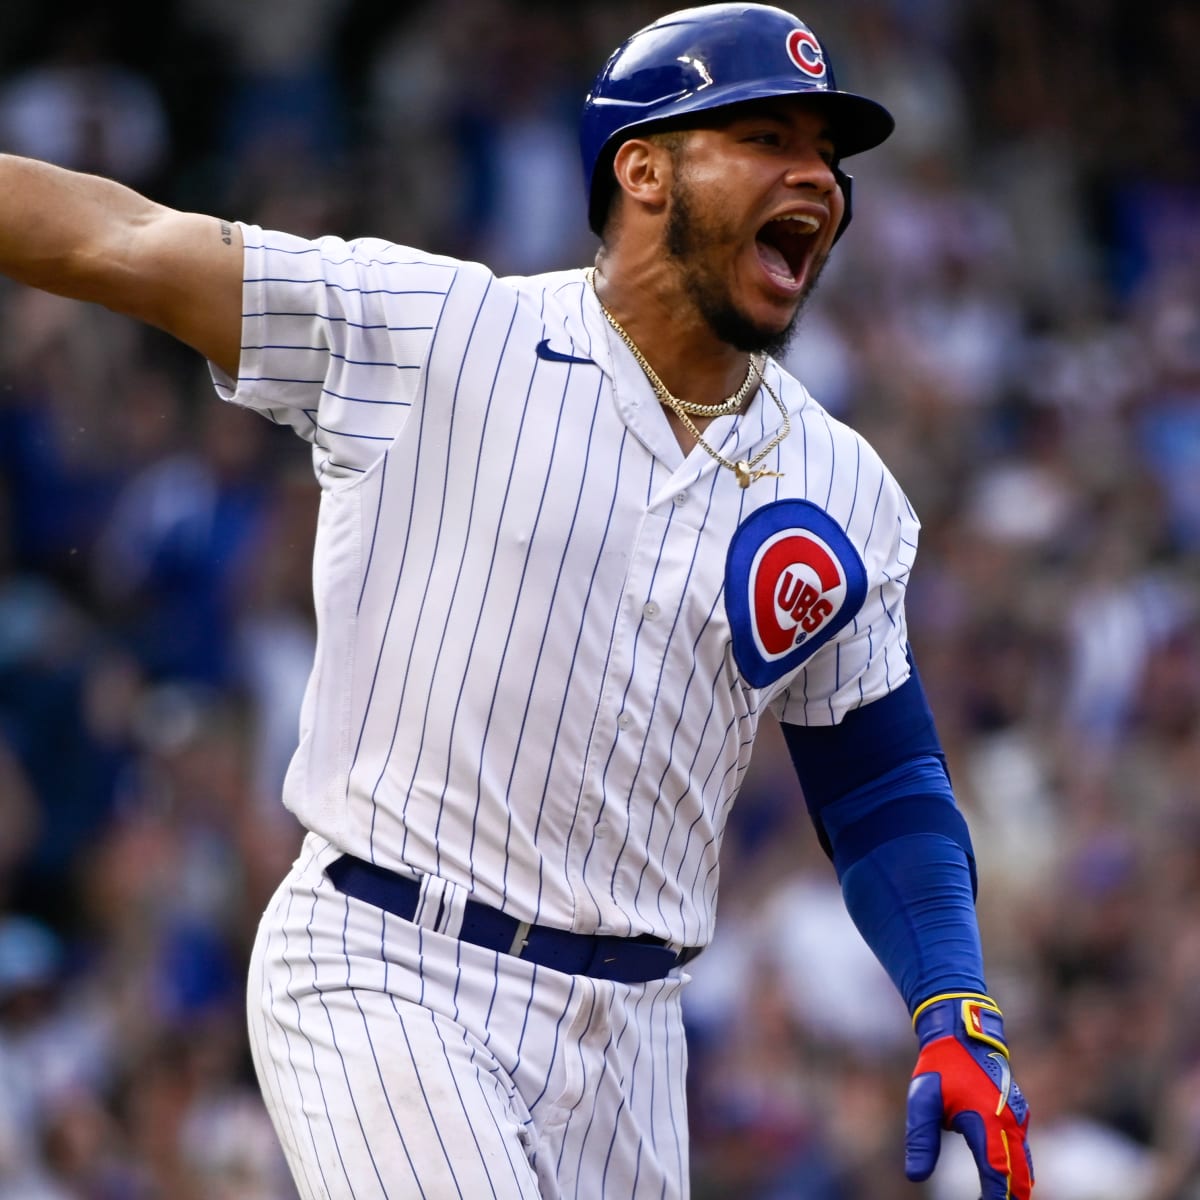 MLB free agency rumors on Willson Contreras, Mets, Dansby Swanson - Sports  Illustrated